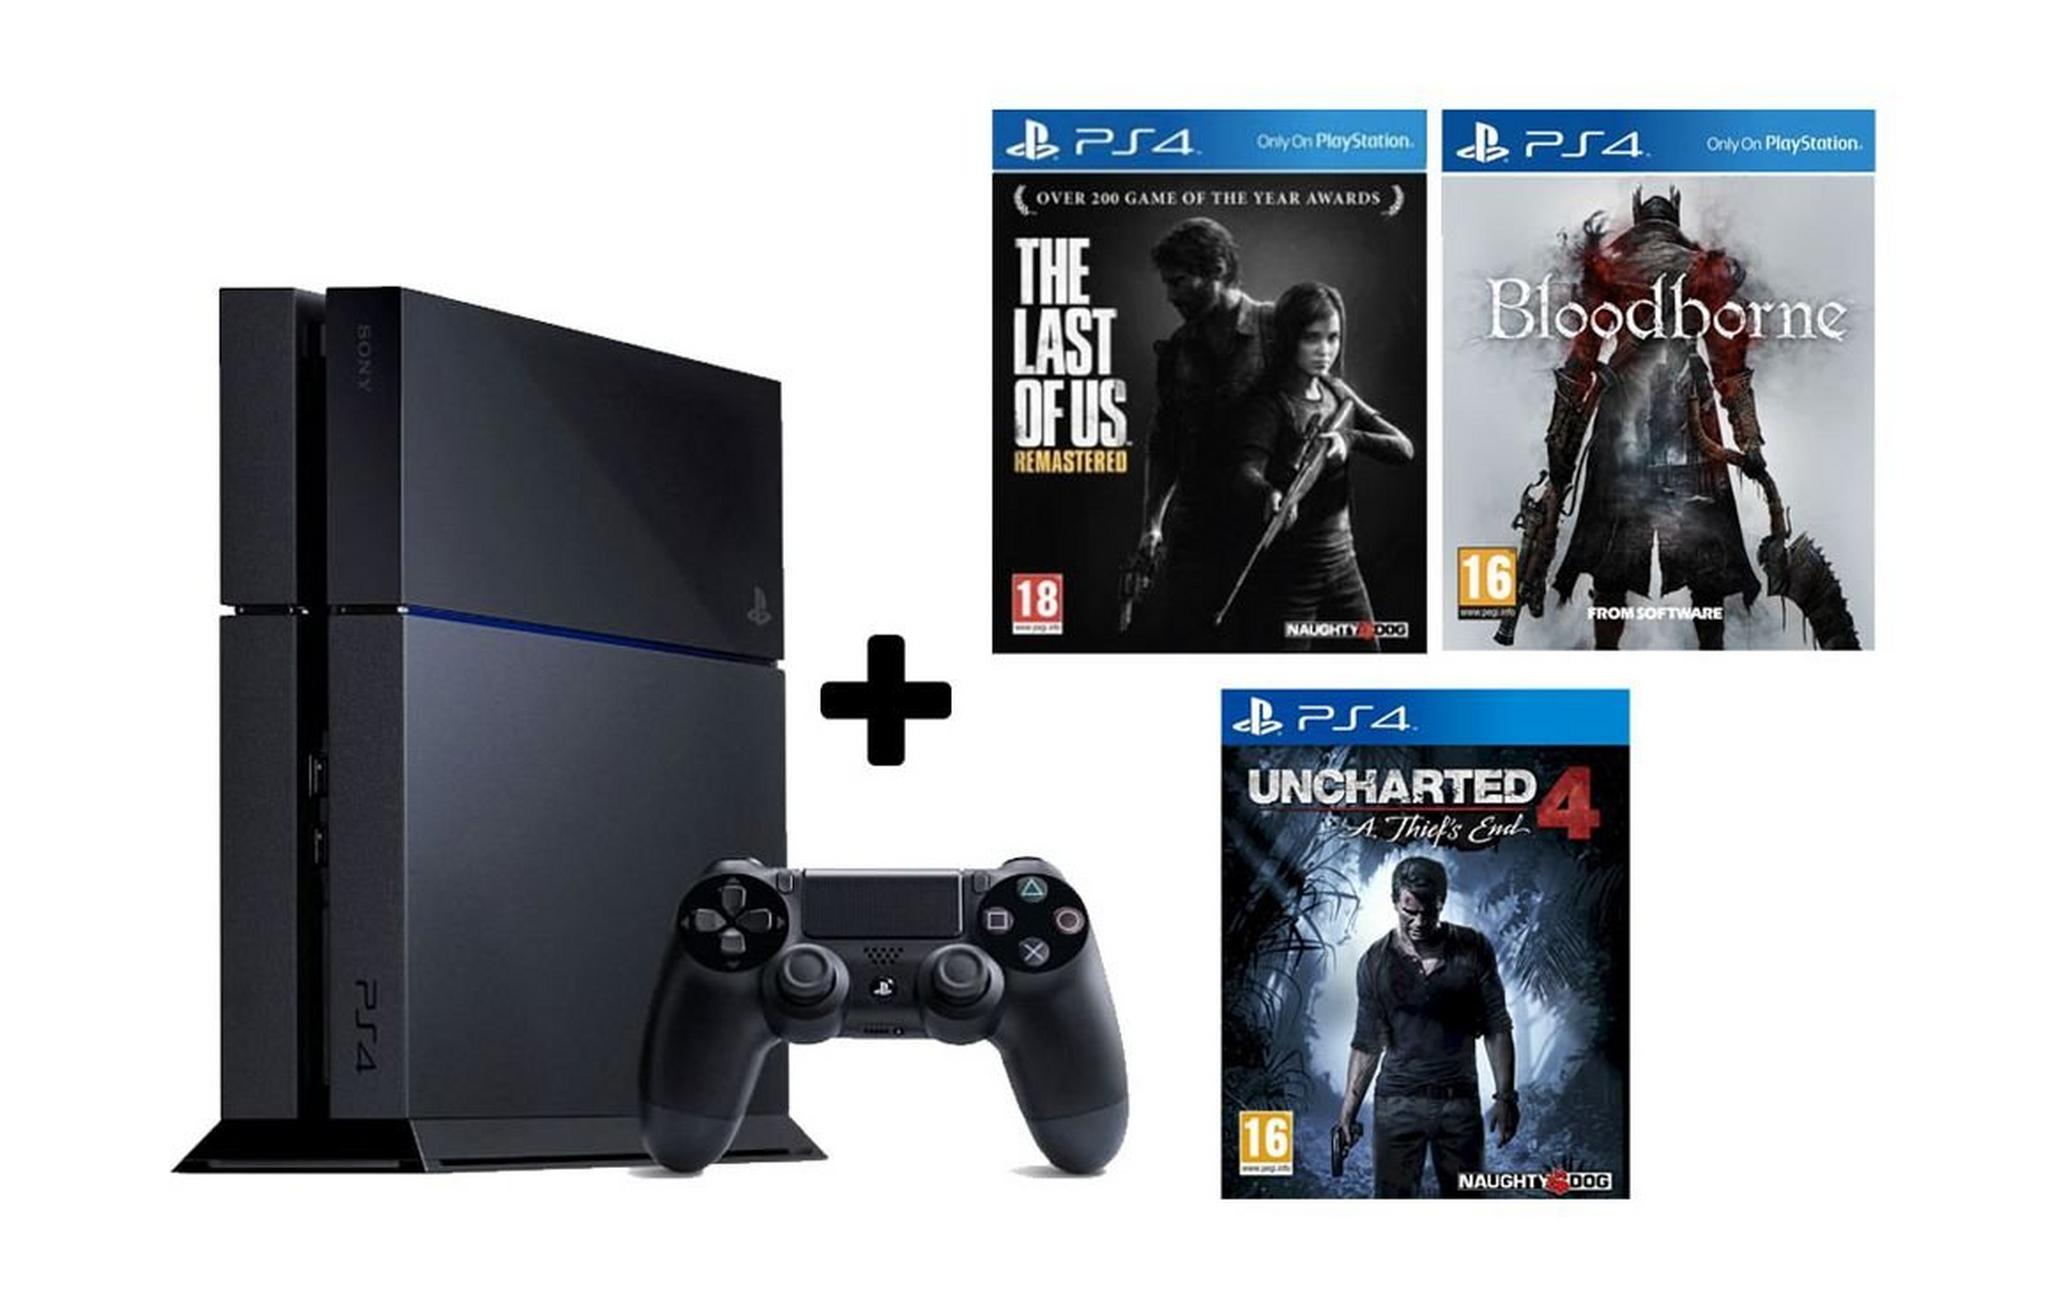 Sony PlayStation 4 1TB Console – Black (Uncharted 4 + Bloodborne + The Last Of Us Games)